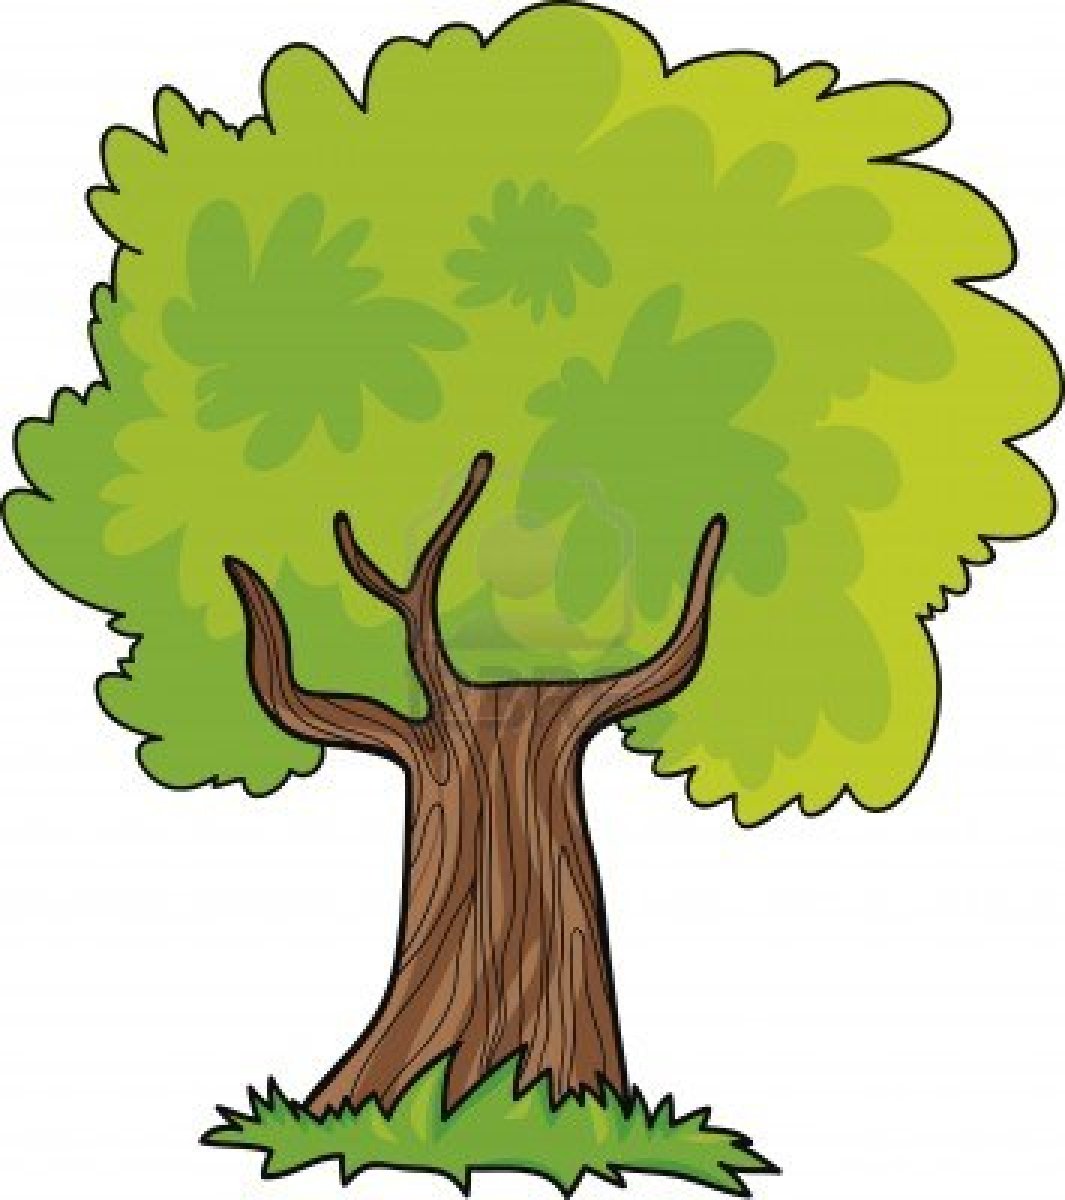 Cartoon Tree With Branches - ClipArt Best